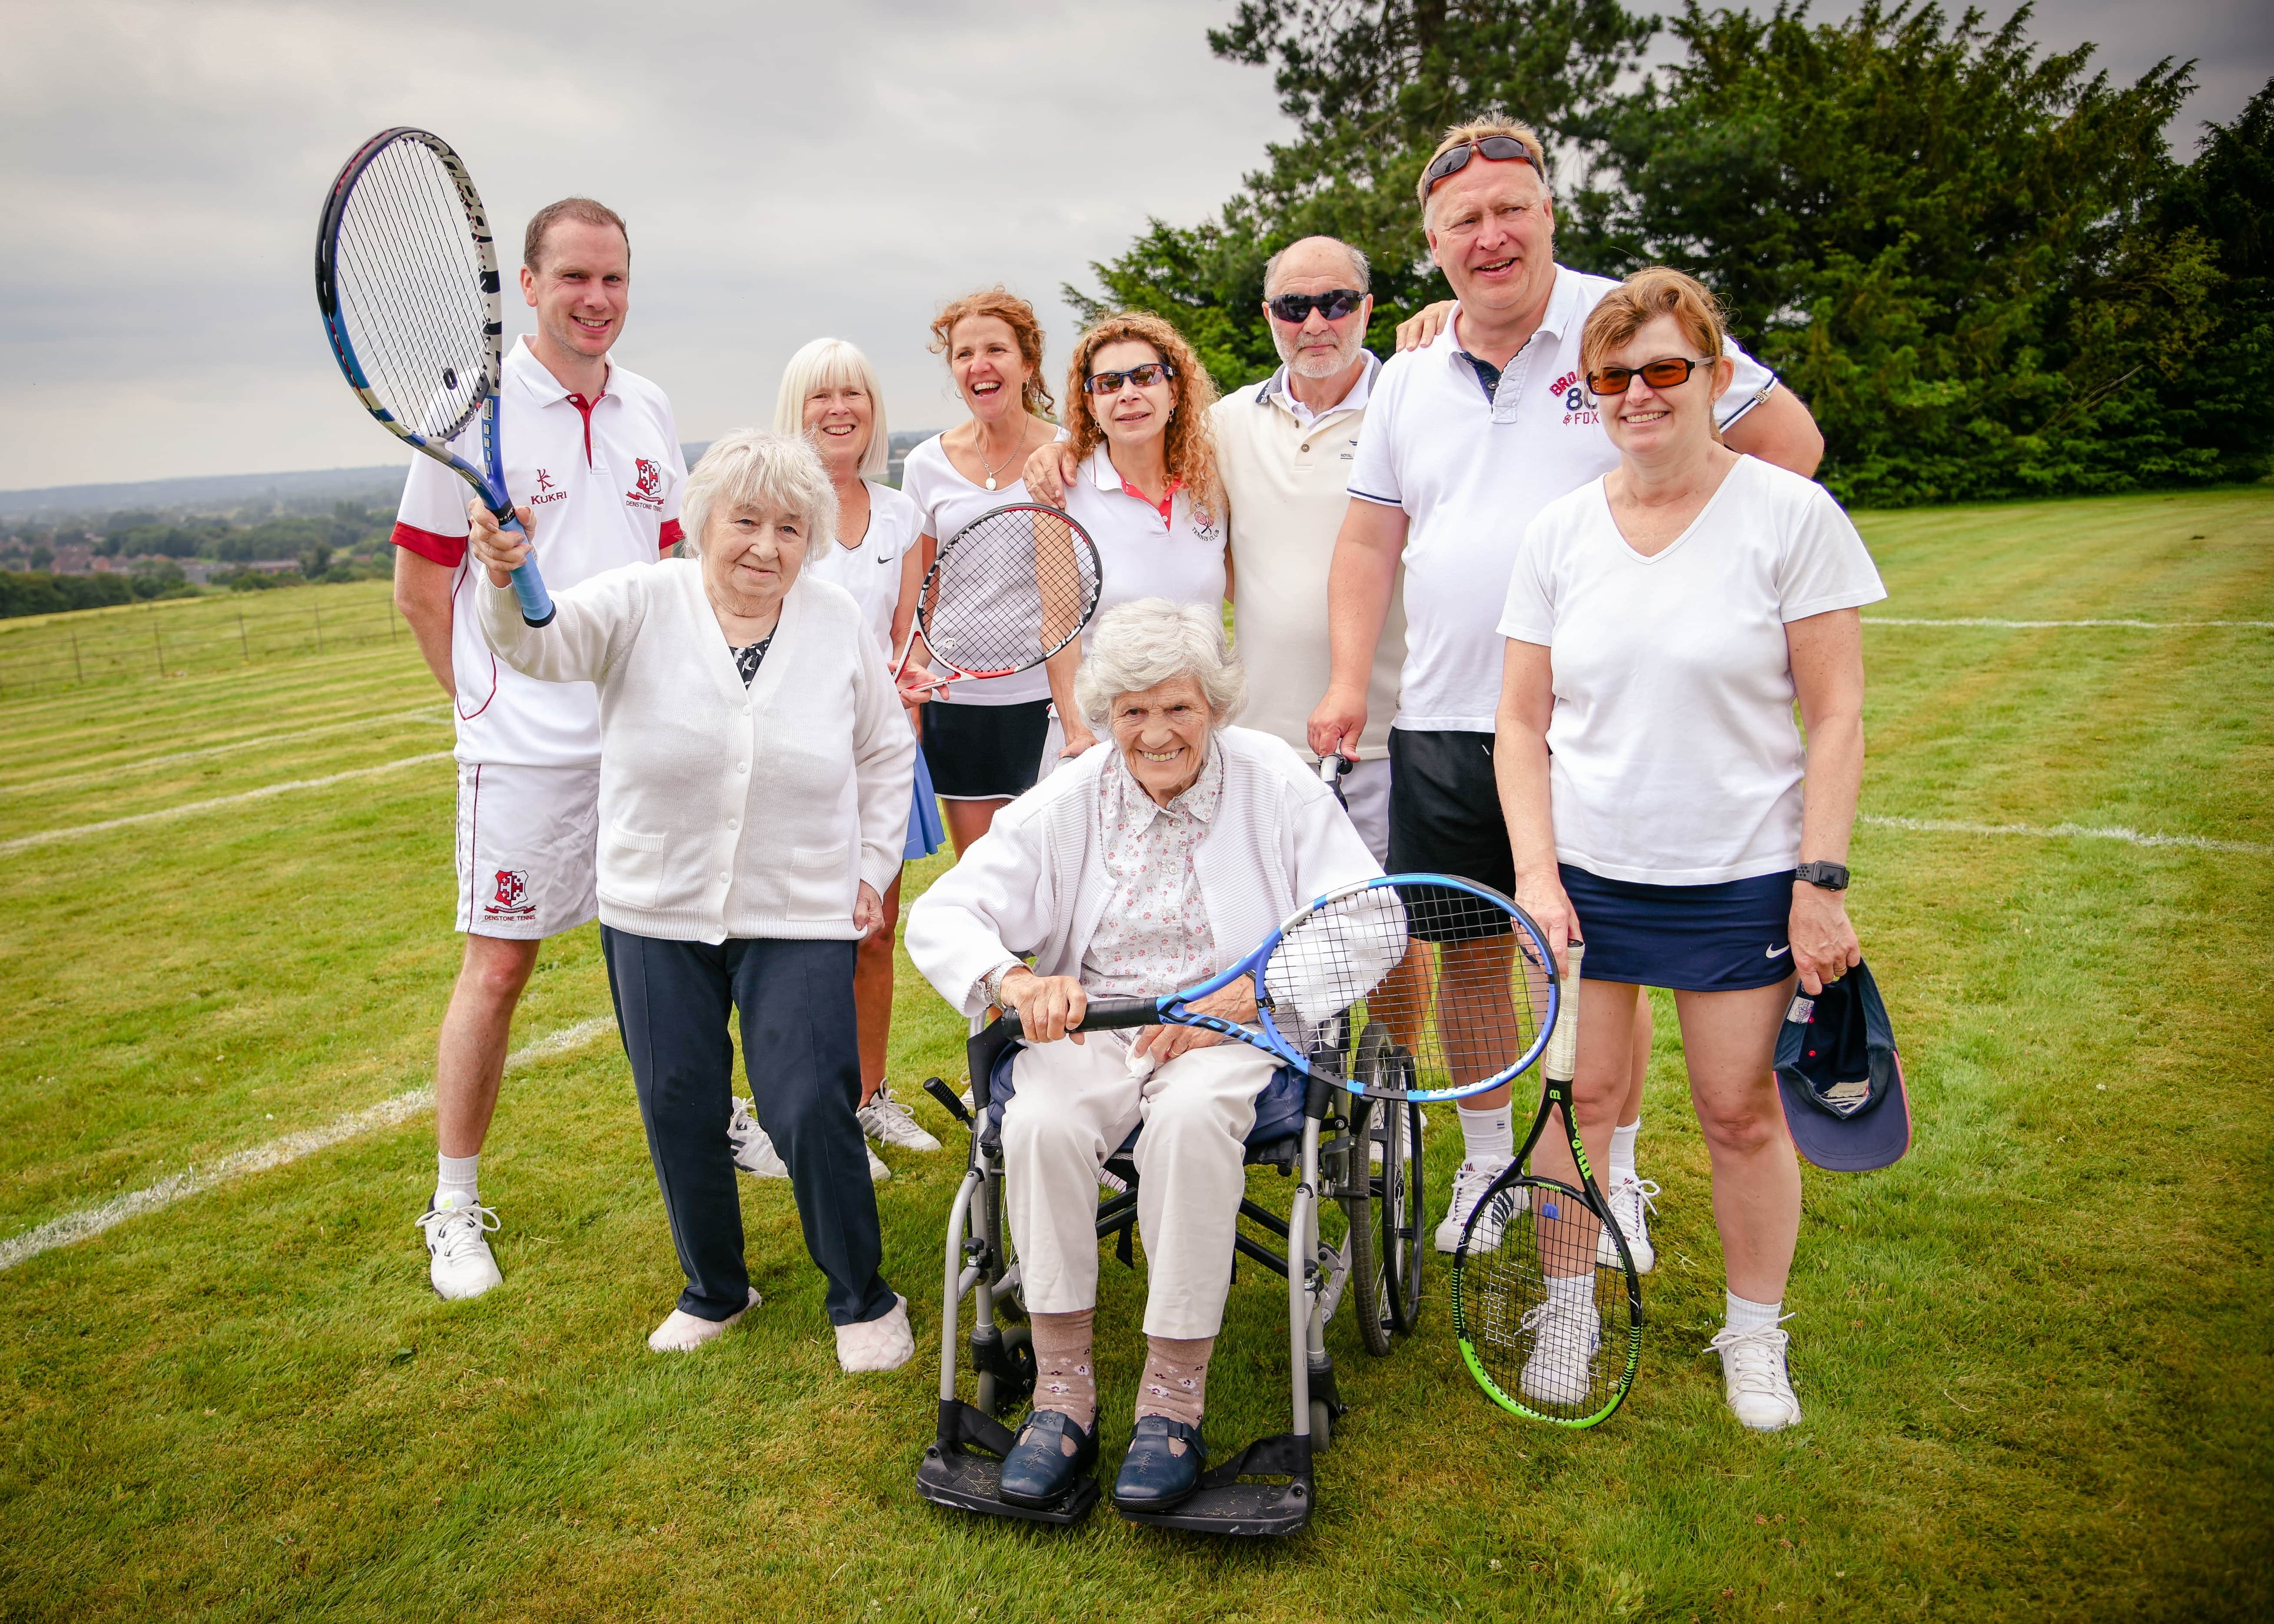 Barrowhill Hall serves up tennis treat in time for Wimbledon